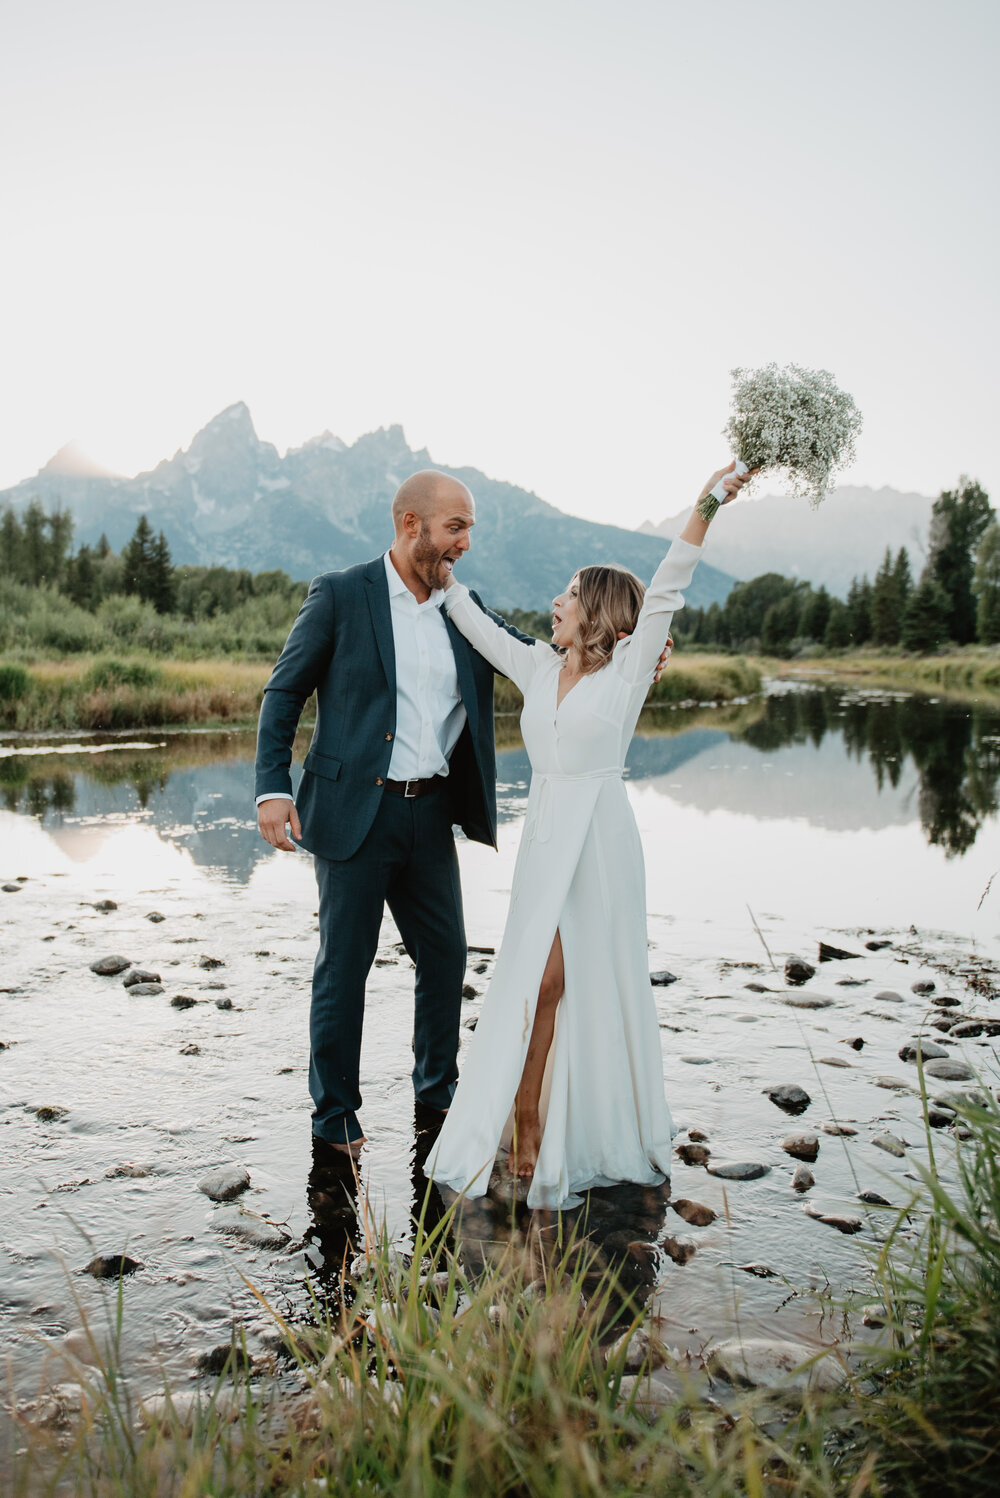 bride and groom standing in a rocky stream together in front of the Tetons as they smile at each other with the brides bouquet in the air sJocilyn Bennett Photography | How to Plan an Elopement | Why Elope | Reasons to Elope | Destination Wedding Photographer | Utah Wedding Photographer | Adventure Photographer | Destination Elopement Photographer | Traveling Photographer | Grand Teton Elopement | Grand Teton Photographer | National Park Weddings | Mountain elopement |